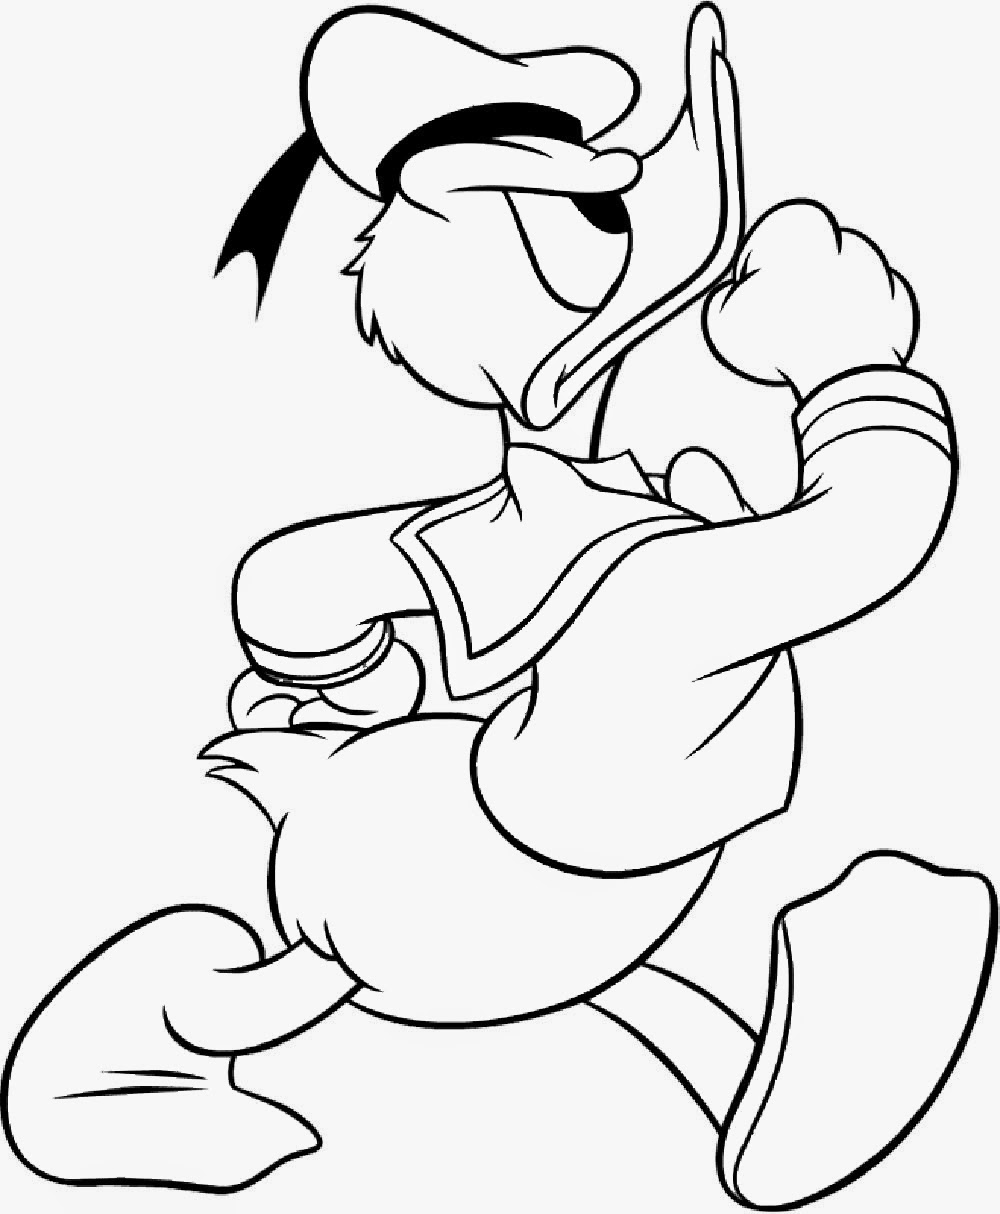 Download Coloring Blog for Kids: Donald Duck Coloring pages